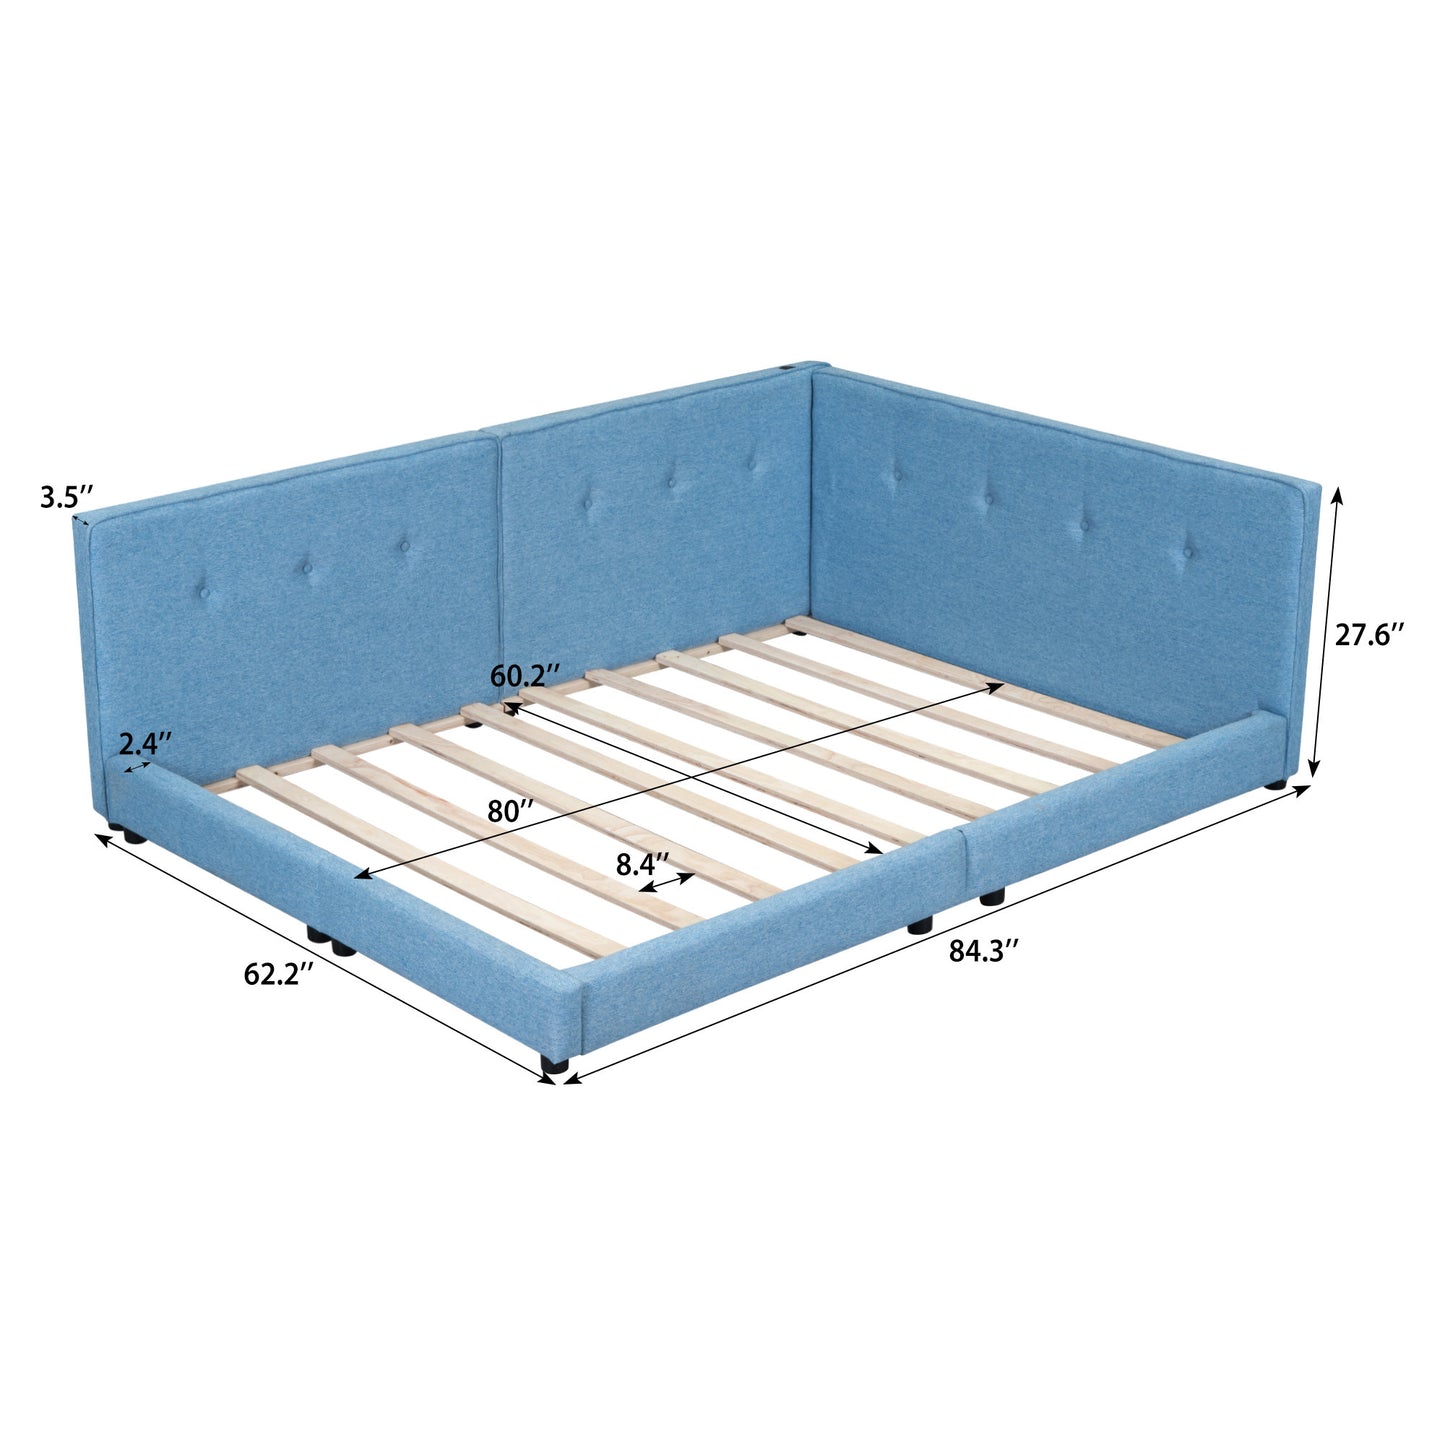 upholstered queen size platform bed with usb ports, blue